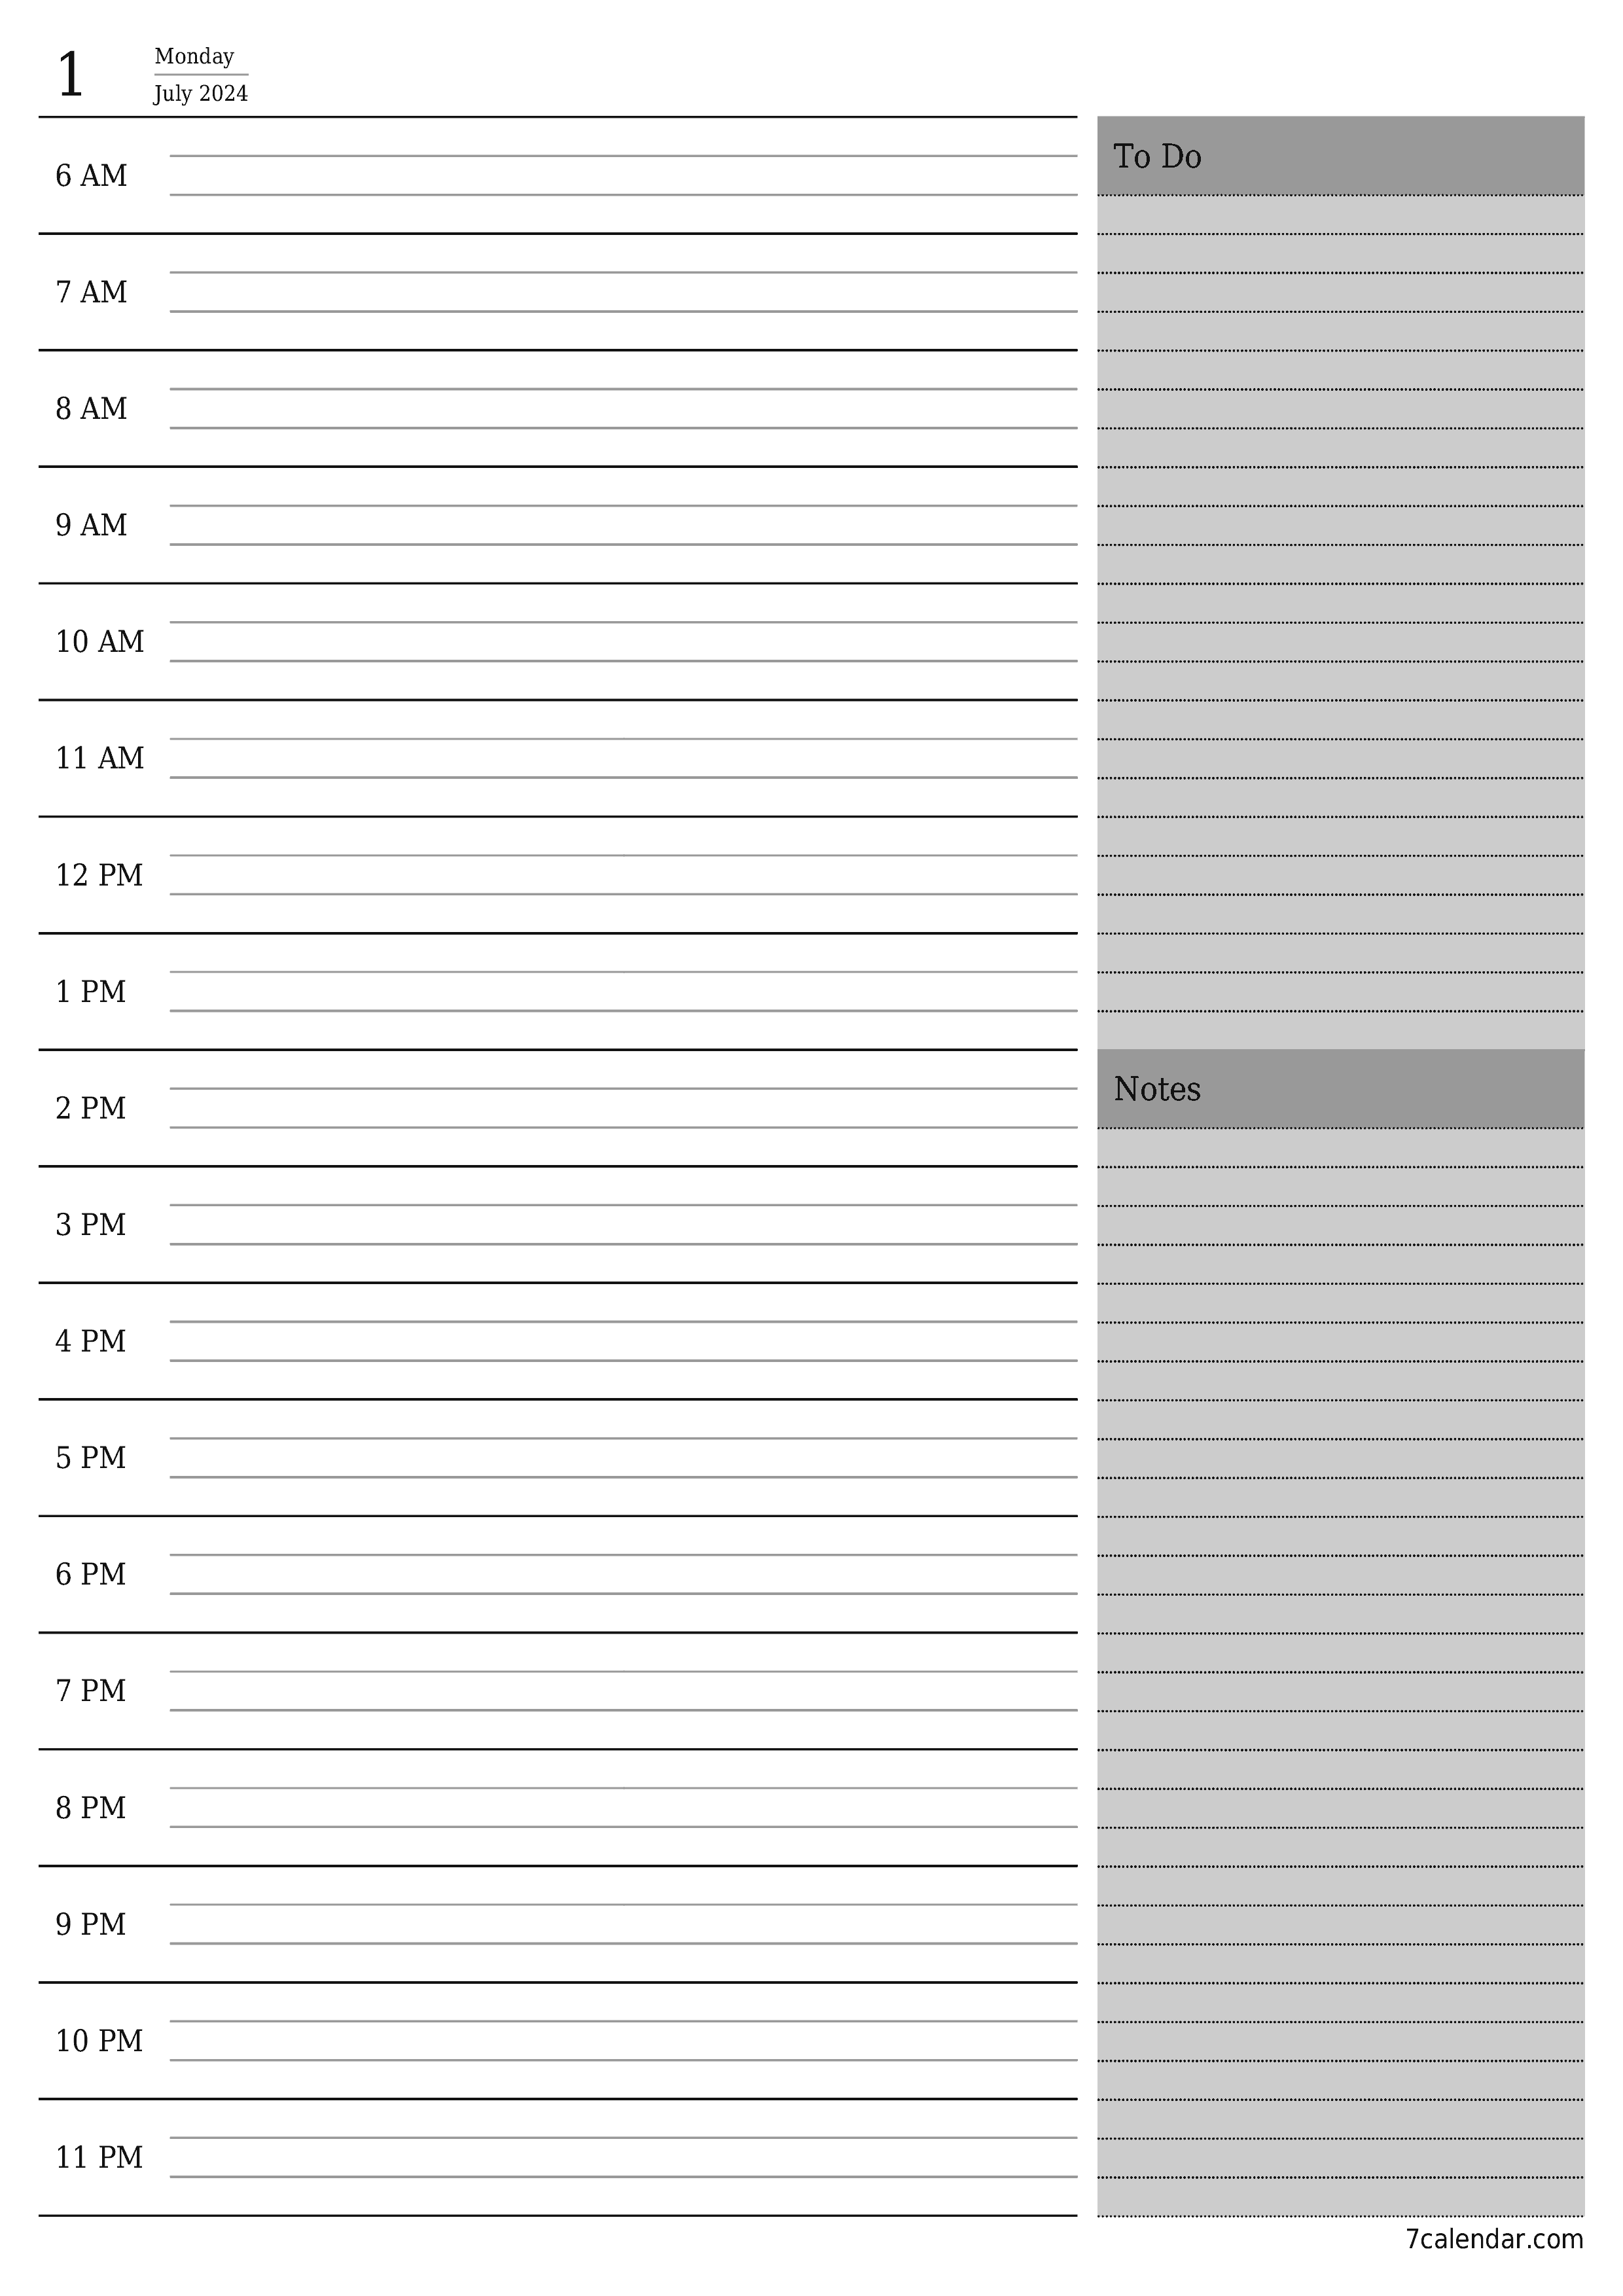 Blank daily printable calendar and planner for day July 2024 with notes, save and print to PDF PNG English